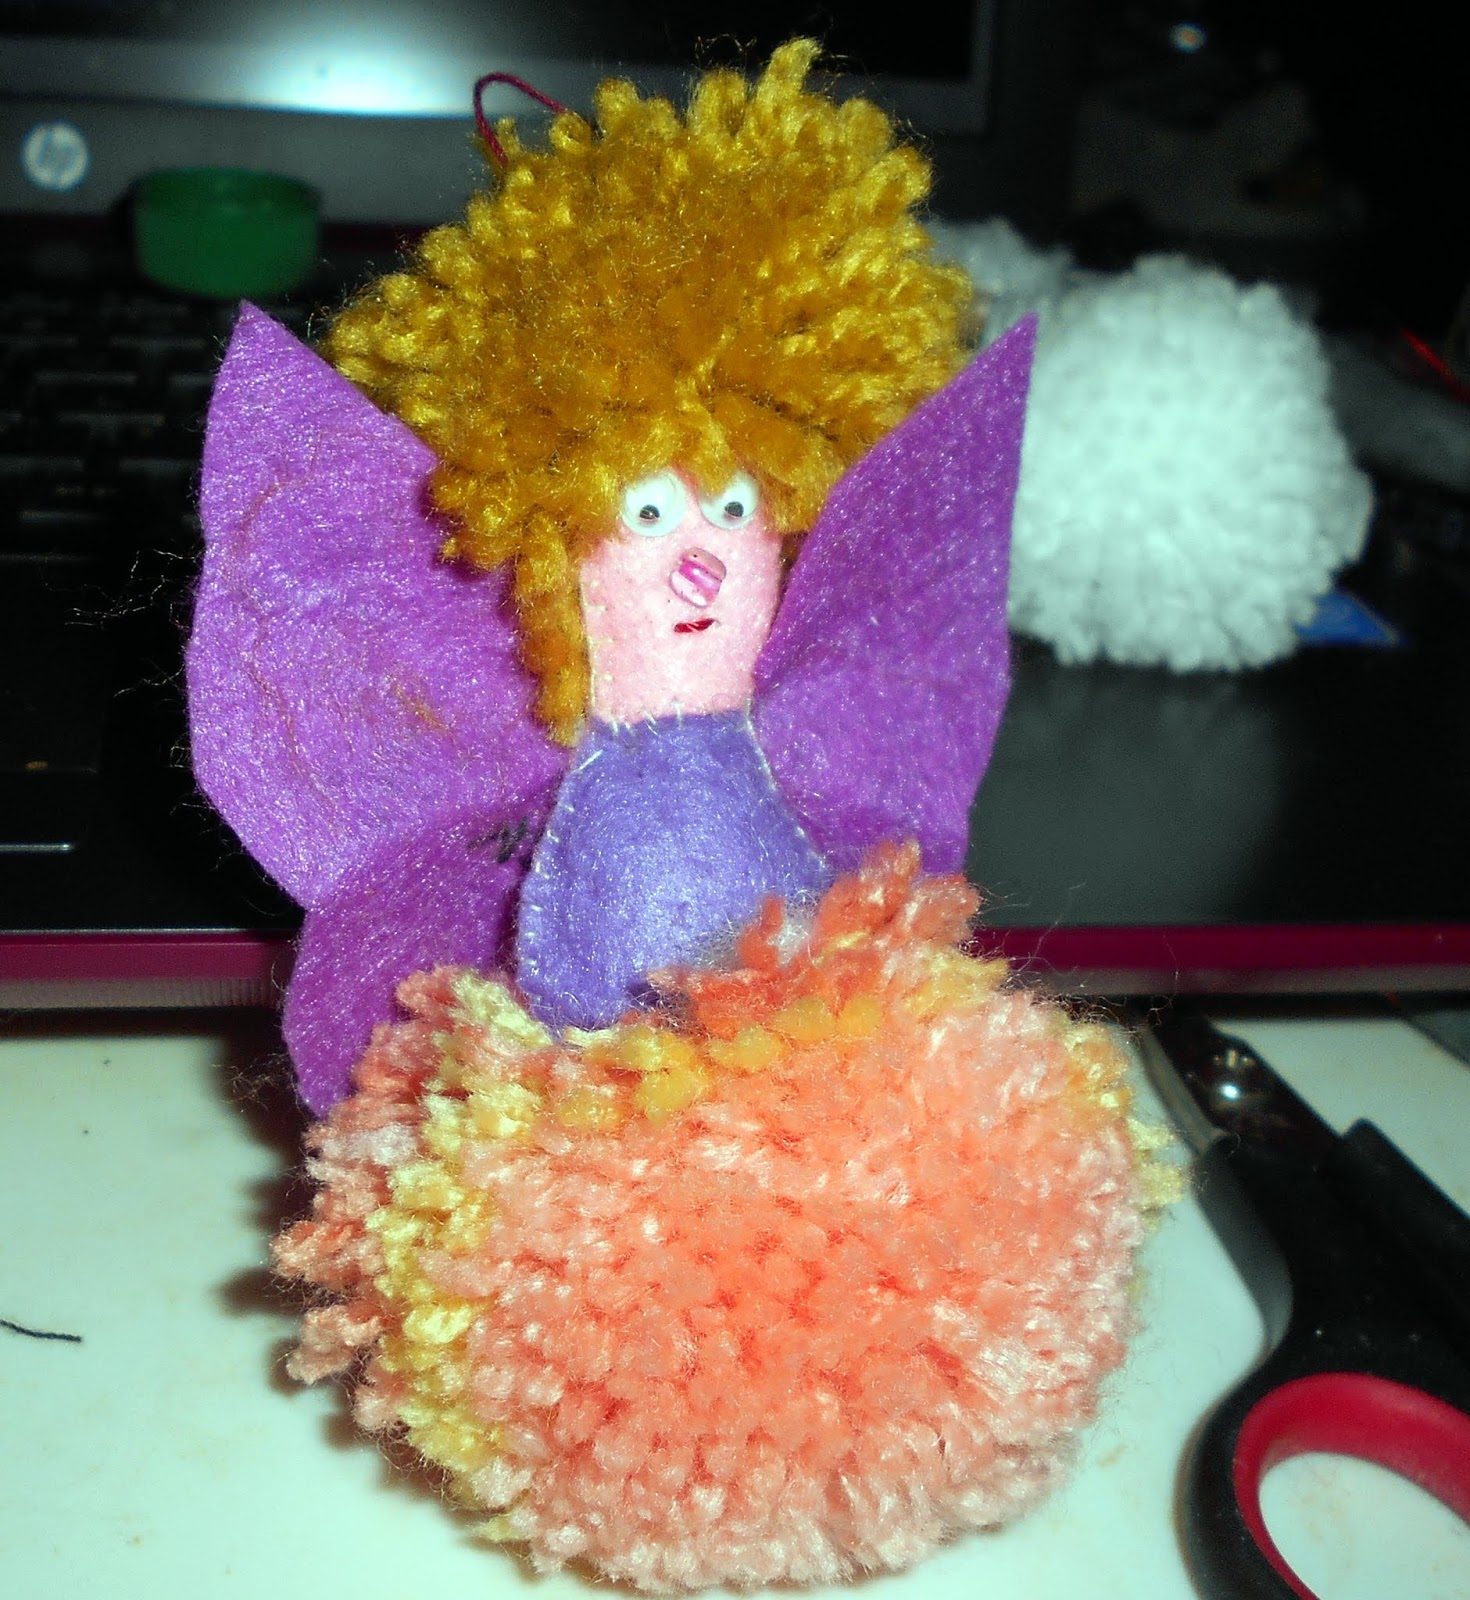 Autumn Gal: Today is this years Pom-pom Angel for the Xmas Tree.